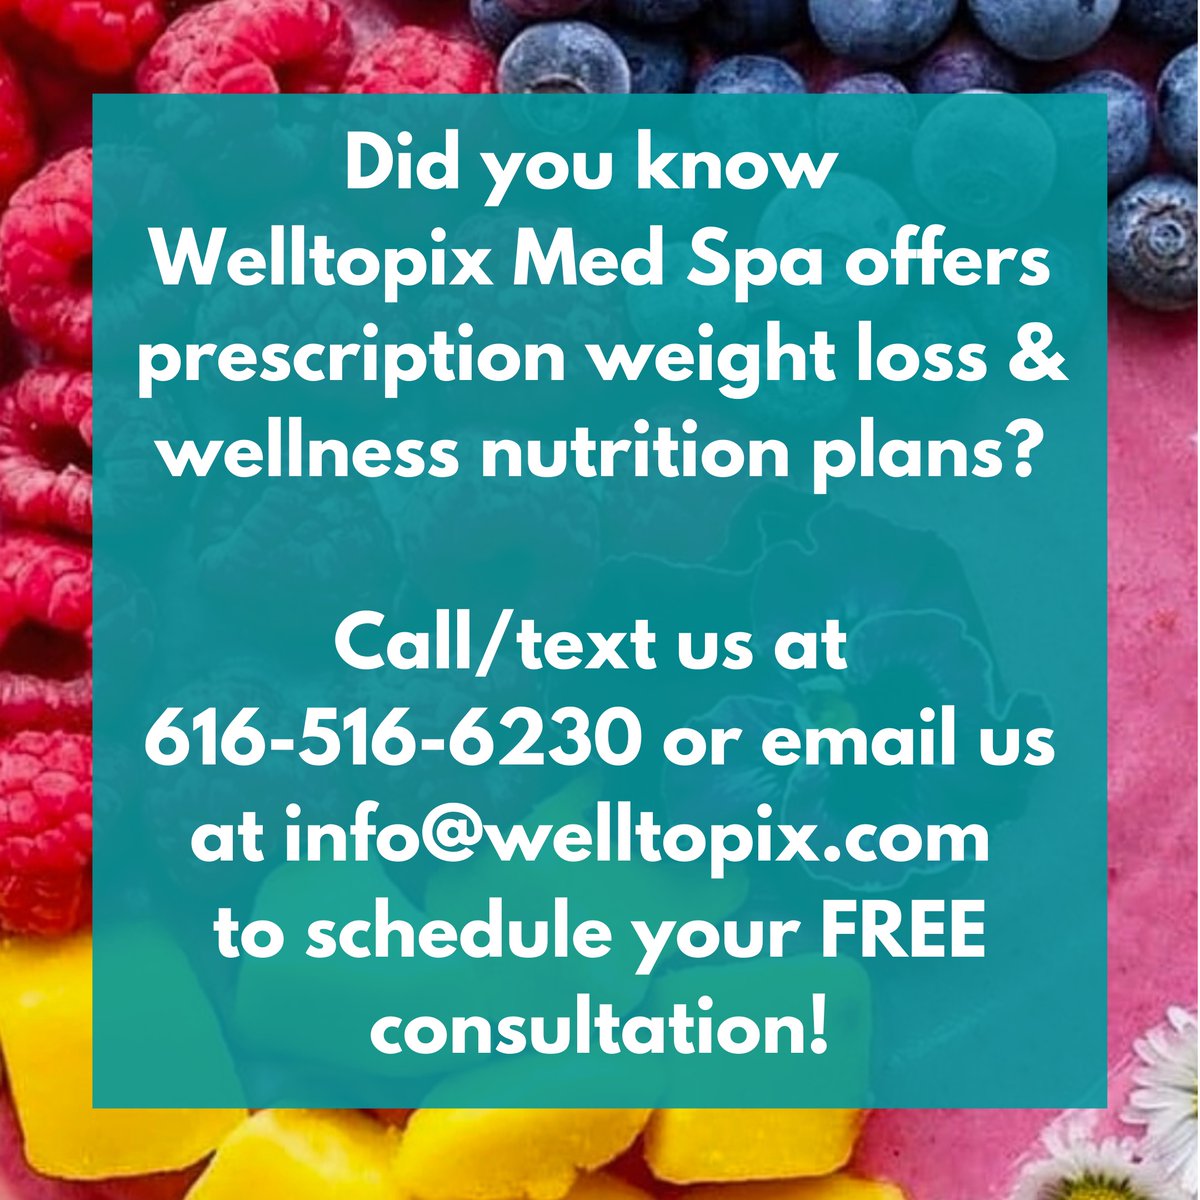 Contact us today to schedule your free nutritional & wellness consultation!  2020 can still be YOUR BEST YEAR EVER! #selfcare #medicalspa #medspa #weightloss #2020 #grandrapidsmi #michiganmedspa #wellness #wellnessspa #healthyliving #health #nutrition #stressfree #mealplan